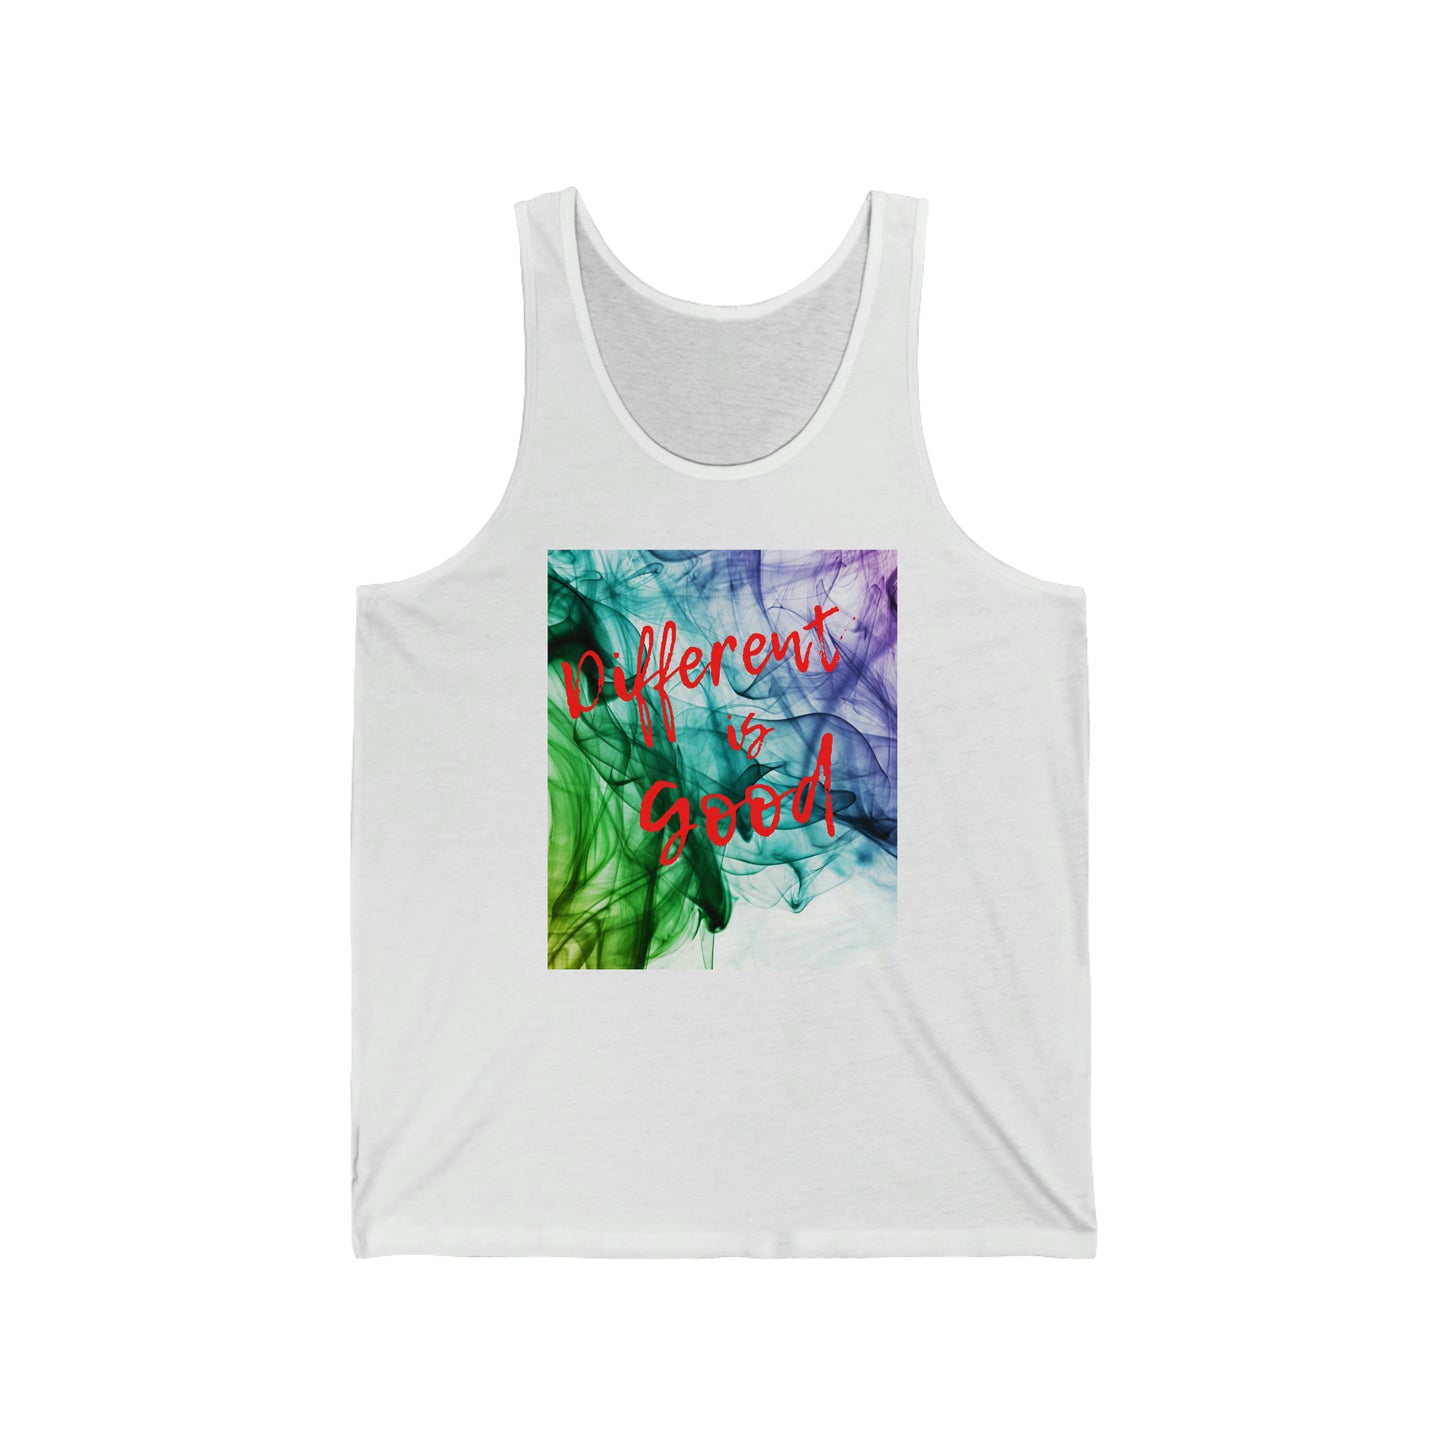 Different Is Good  Unisex Tank Top